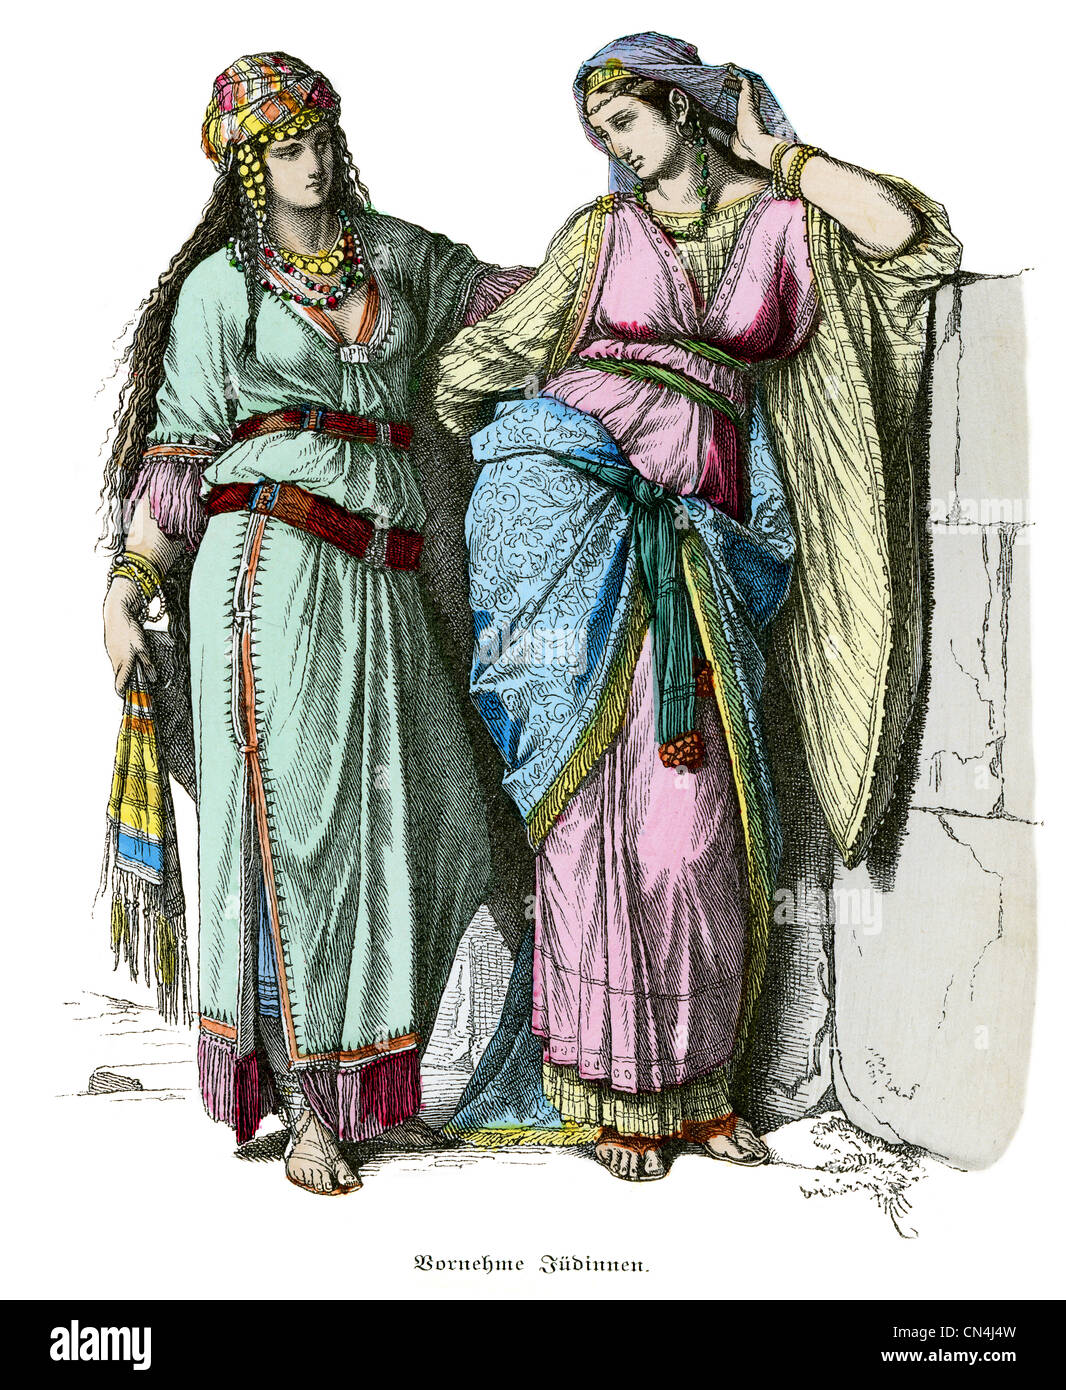 Jewish women from before the time of Christ Stock Photo